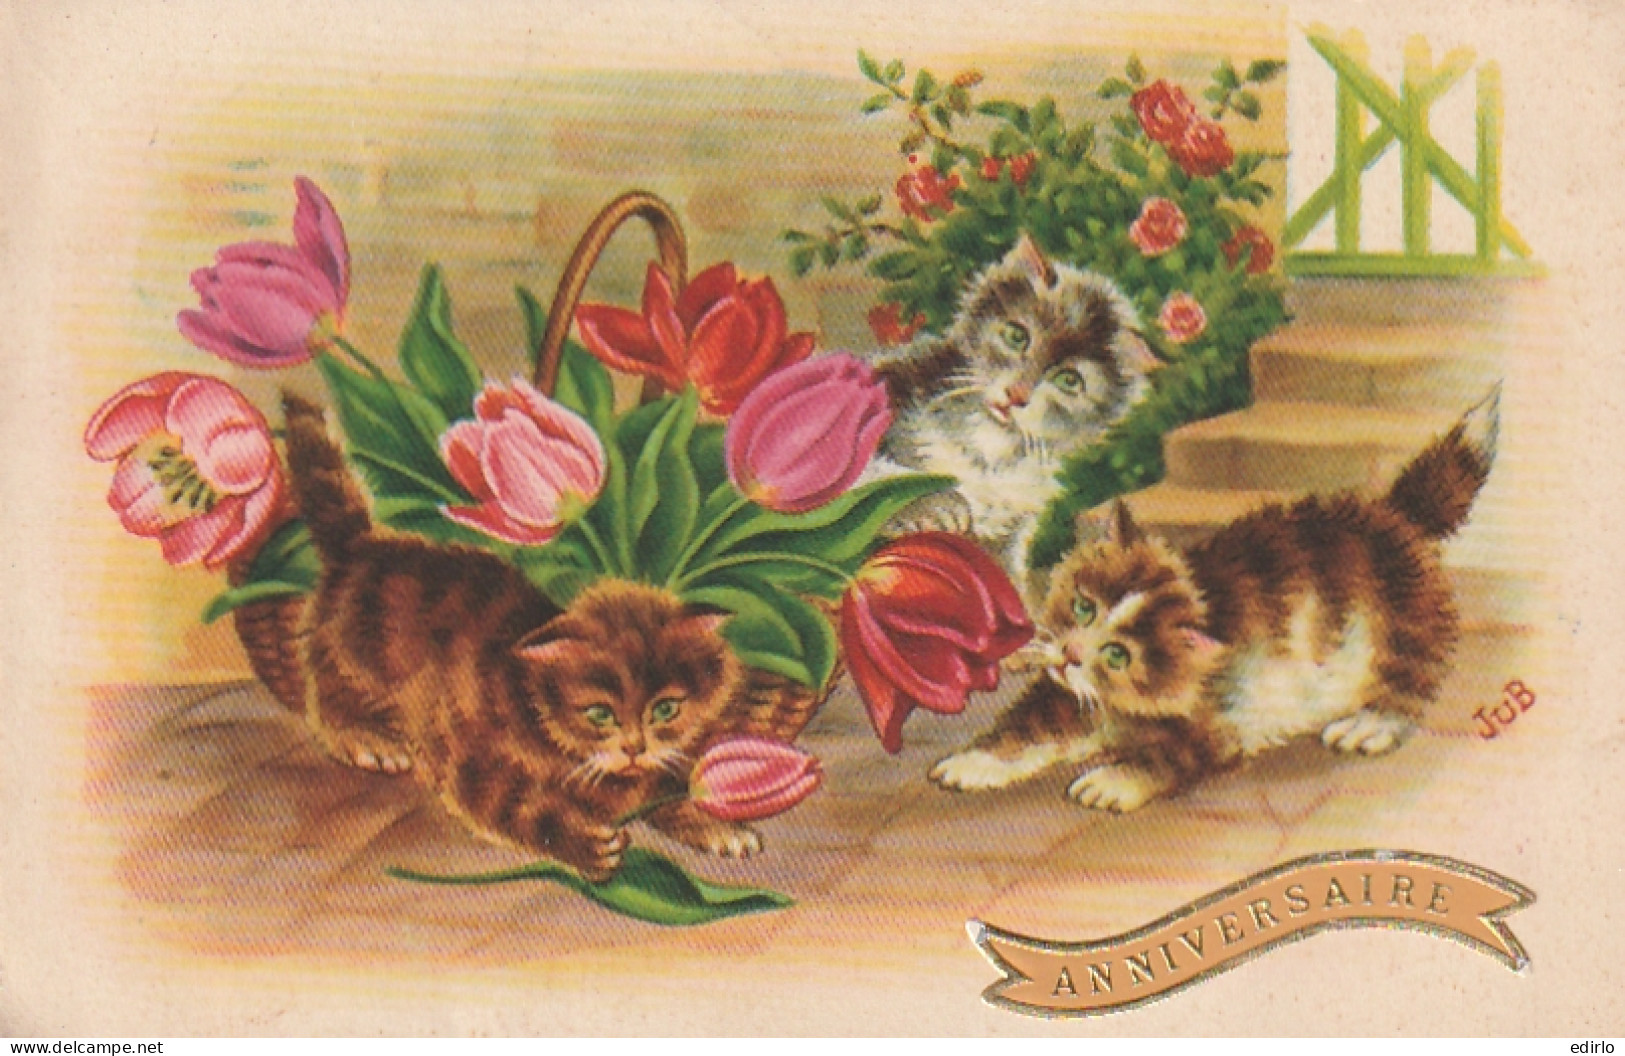  ***  CHATS *** CHATTS CHATONS  --  Chatons Chats Et Fleurs Série  3350  TTB  - Chats